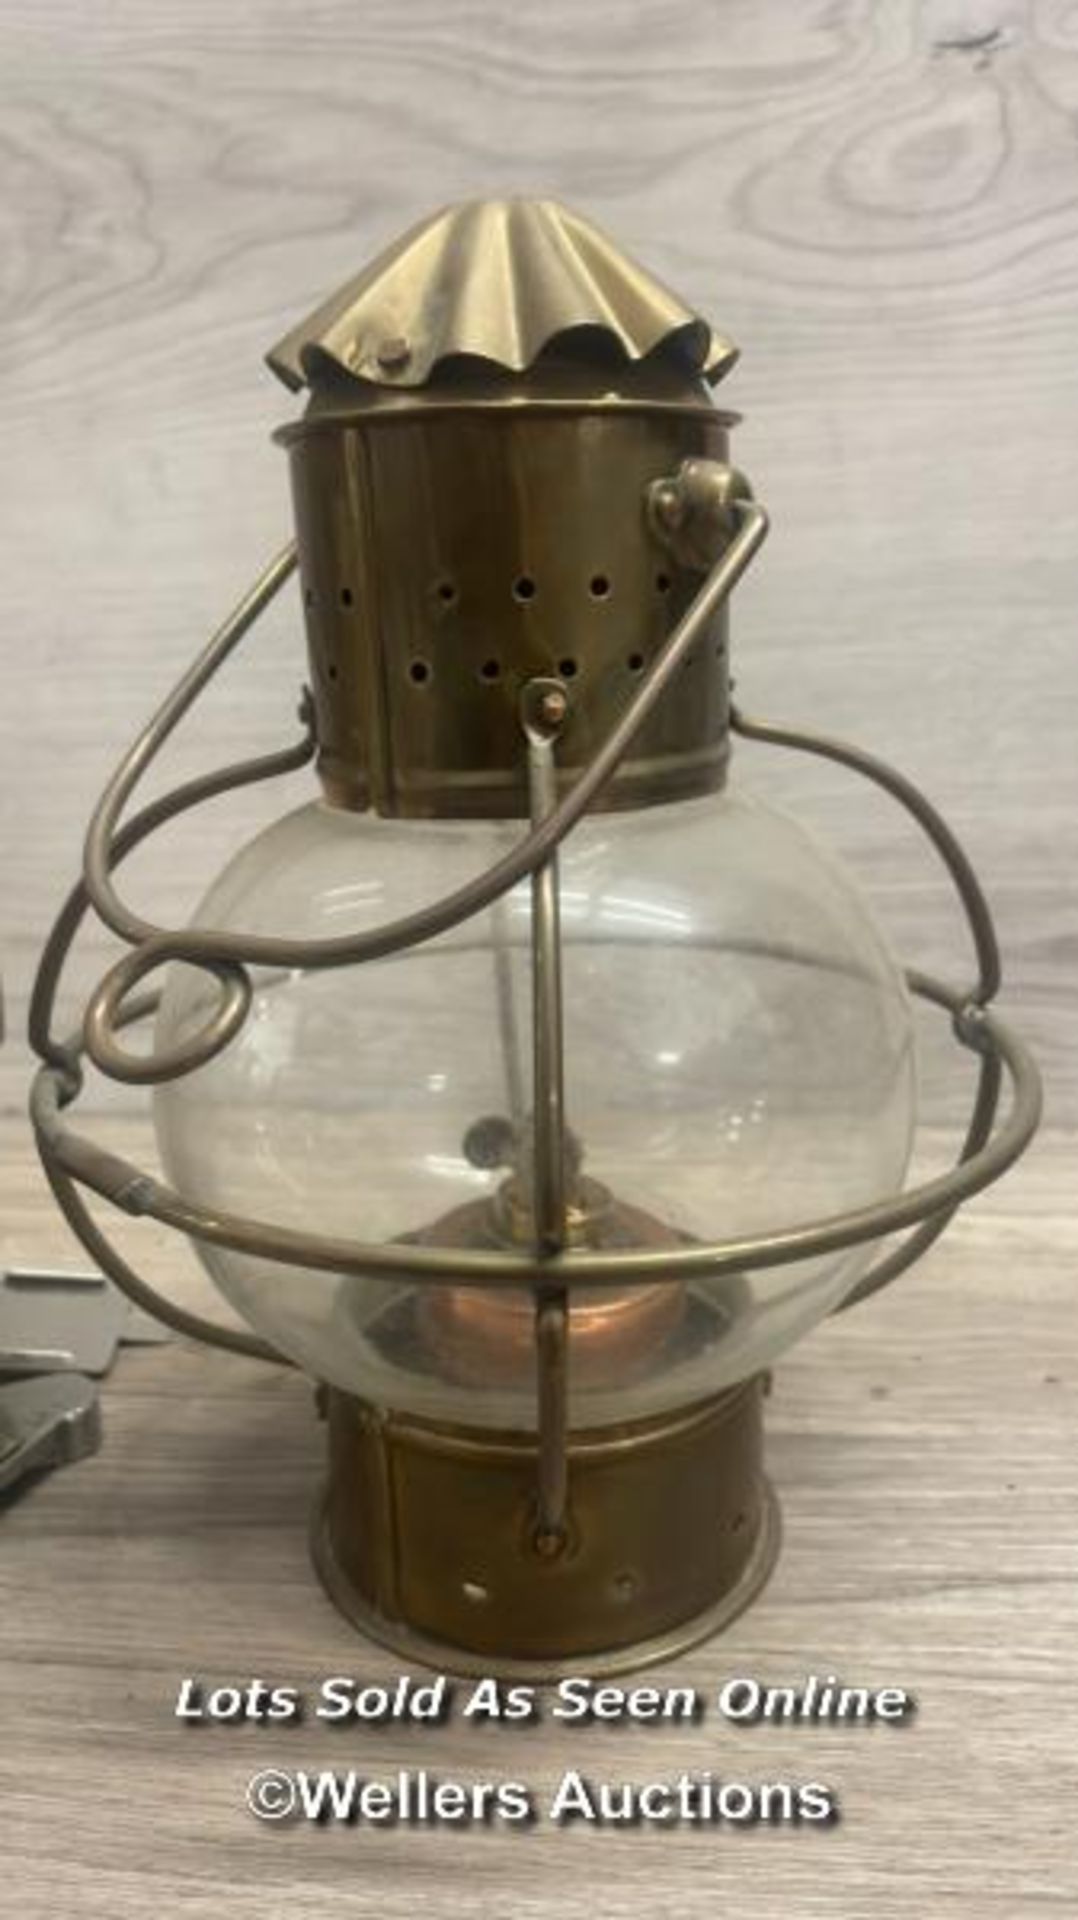 *J H NAYLOR SPIRALARM TYPE S LAMP AND A COPPER HANGING LANTERN - Image 4 of 4